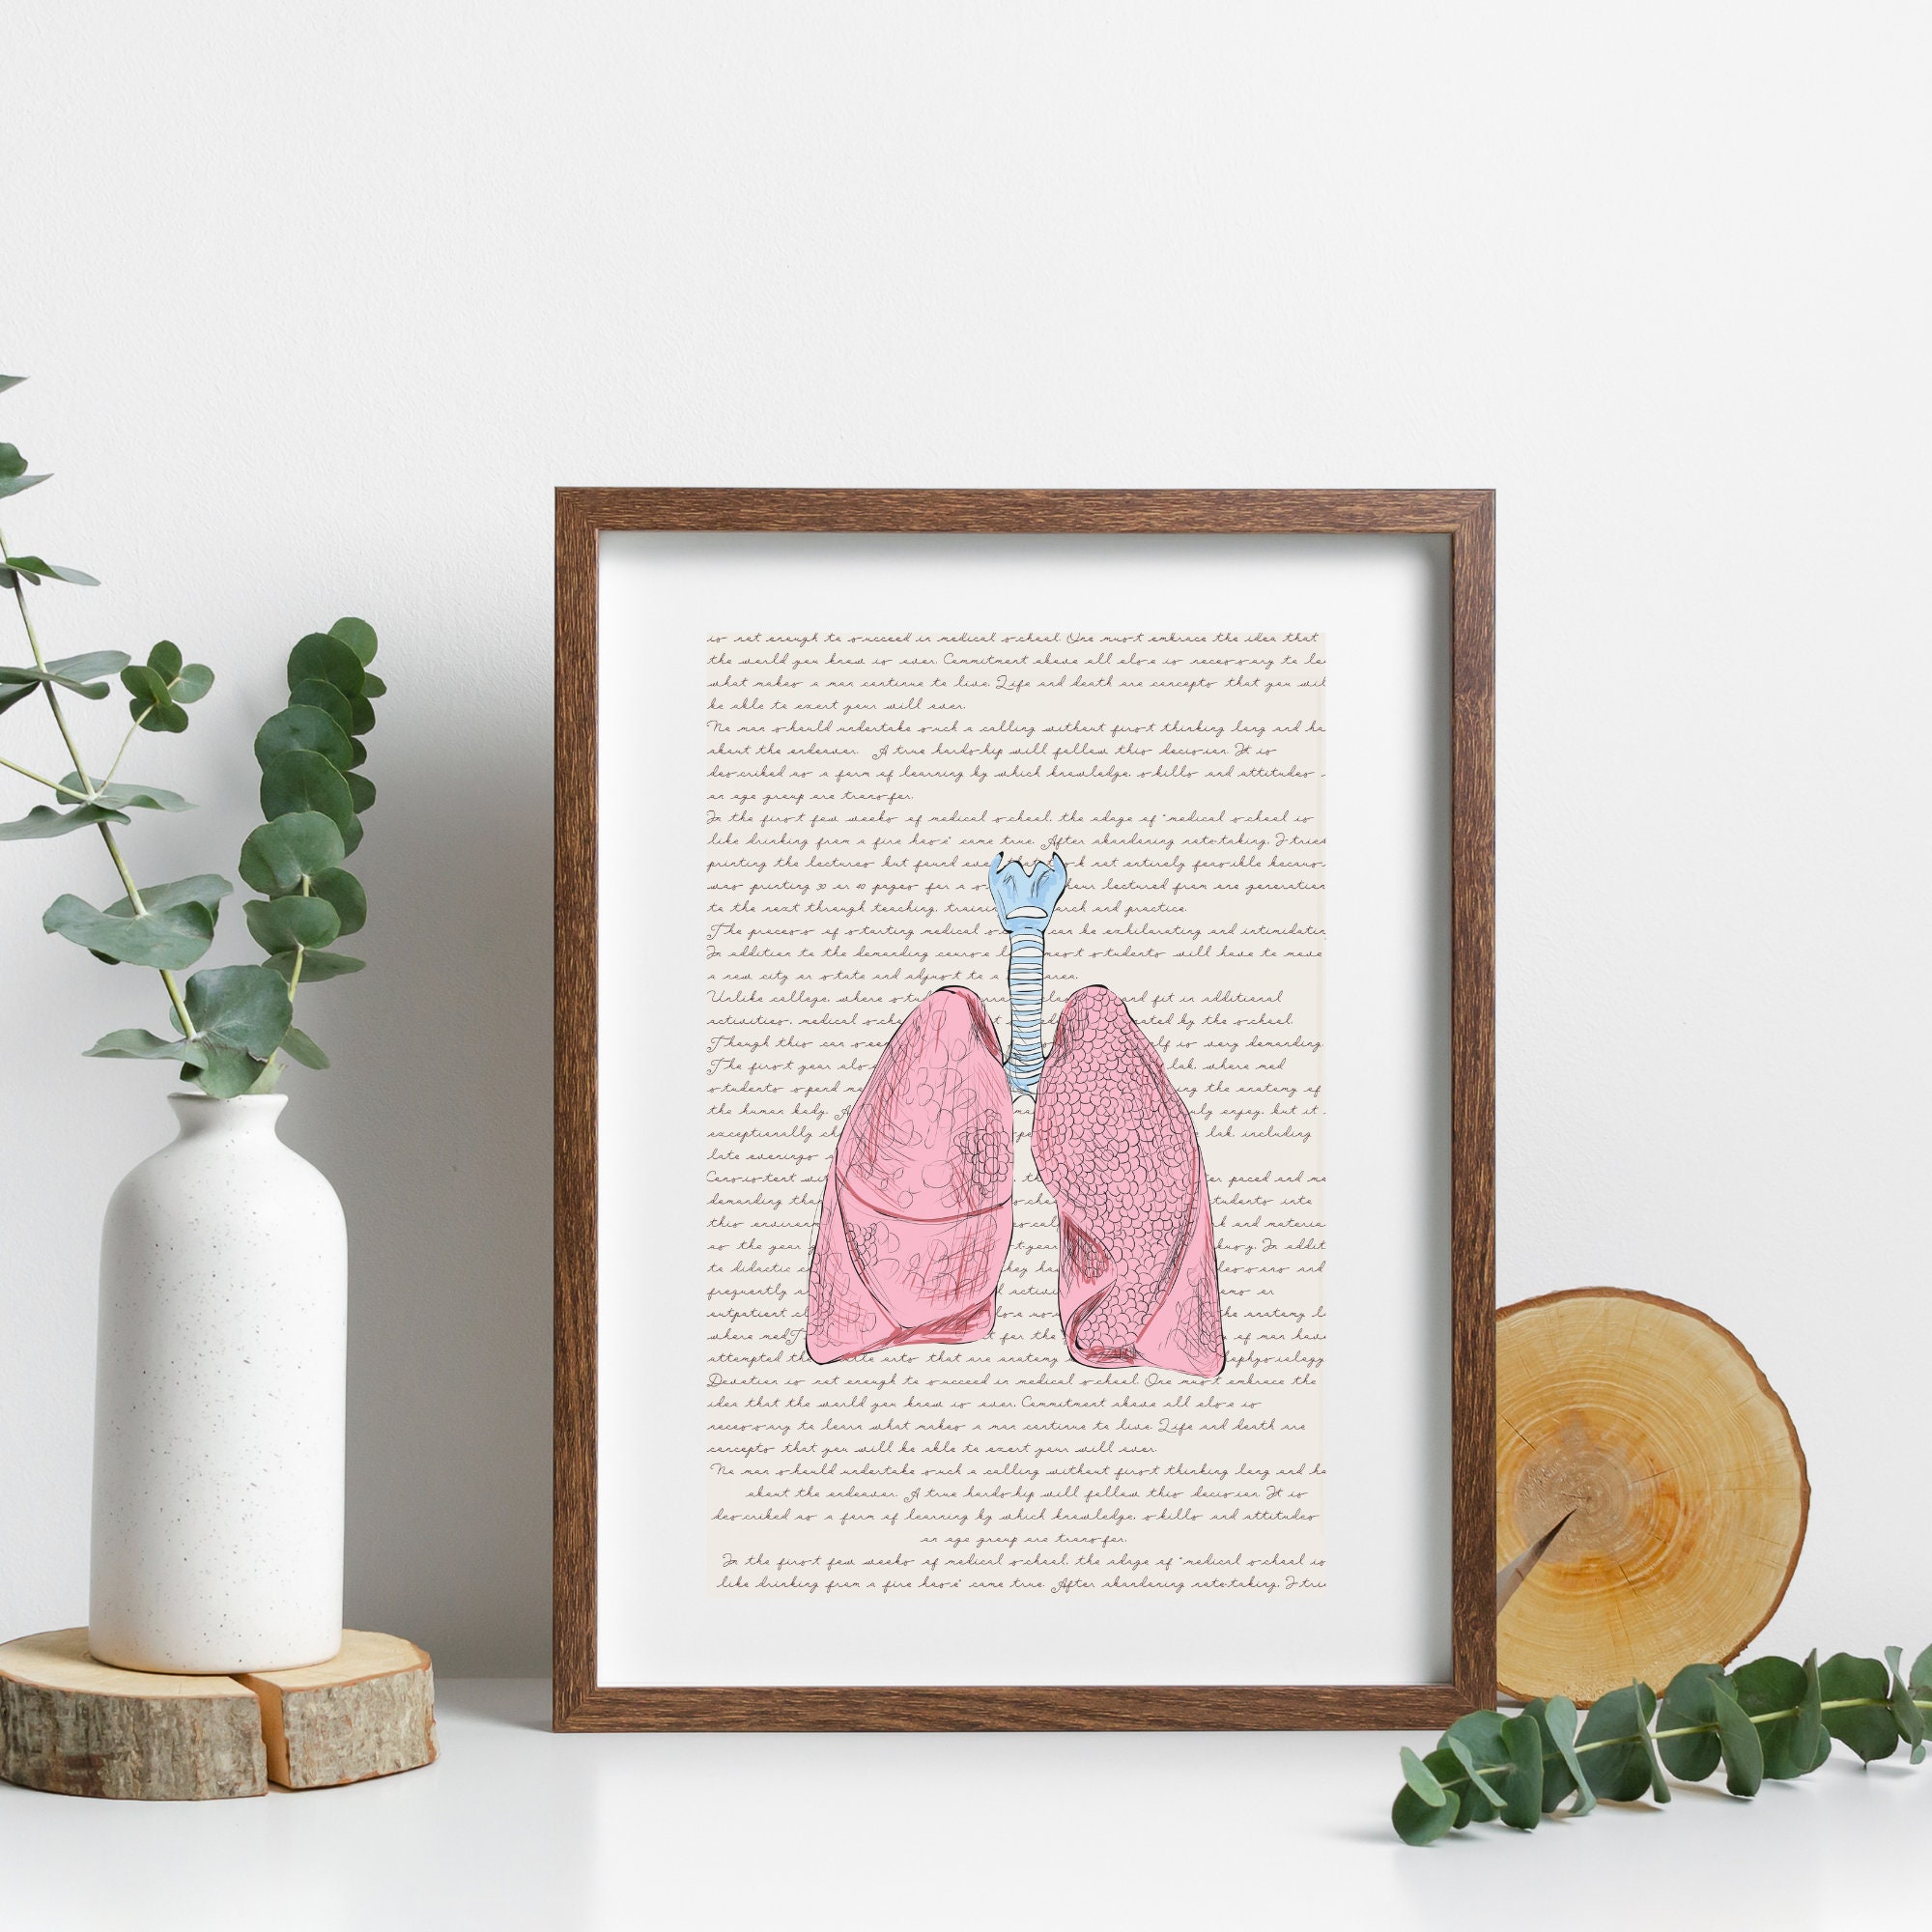 ABSTRACT LUNGS, 5 X 7, 8 X 10, or 11 X 14 Art Print, Modern, Eclectic,  Medical, Anatomy, Prisma Colors, Pulmonology, Hand-drawn, Décor 